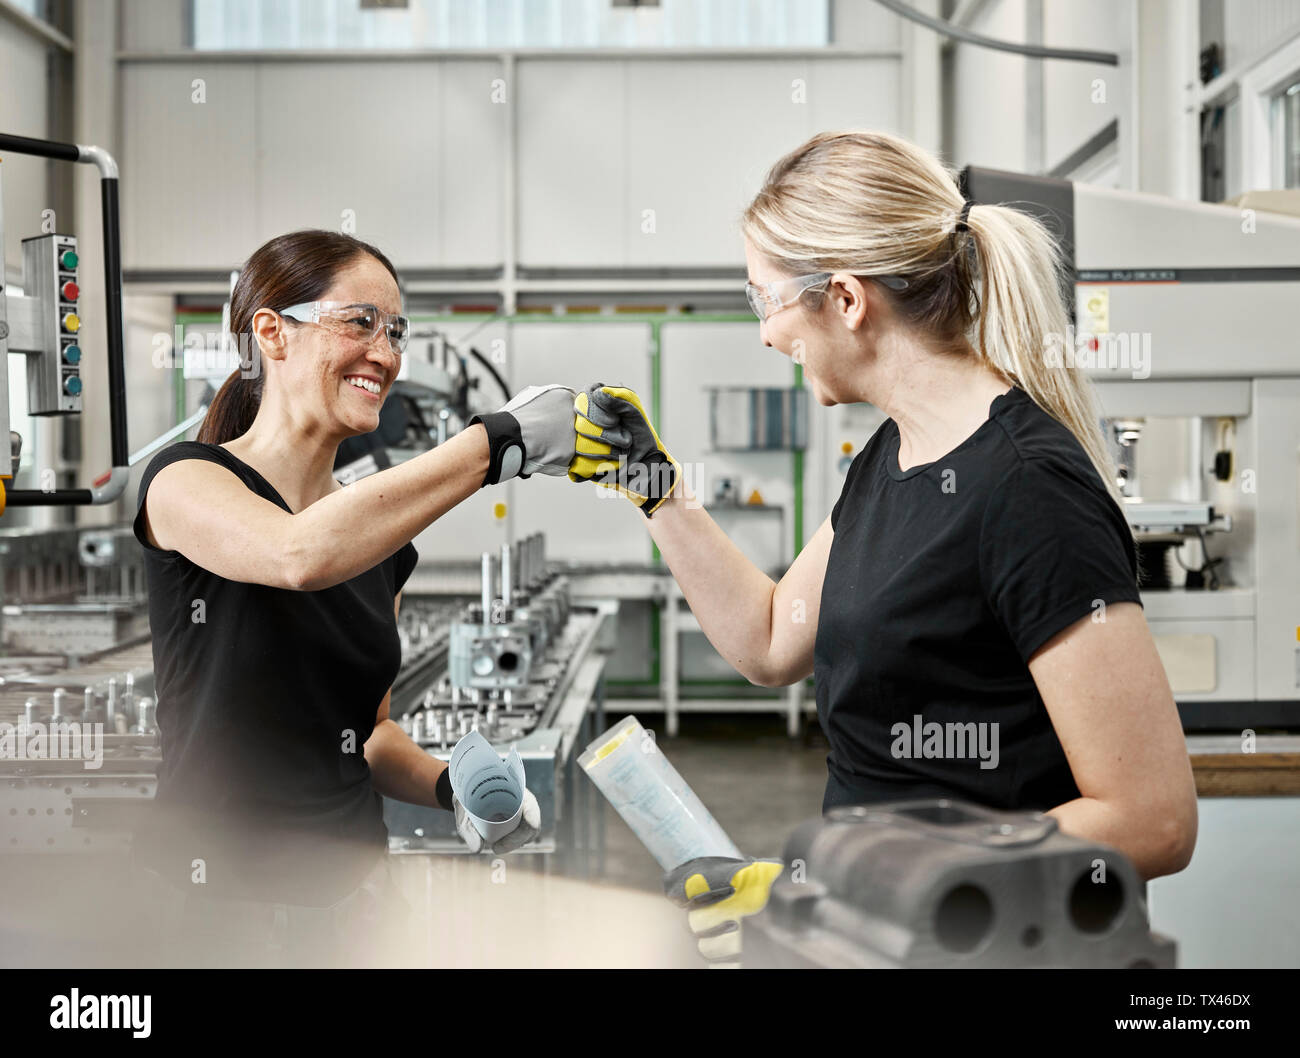 Two woman at work, fist bump Stock Photo